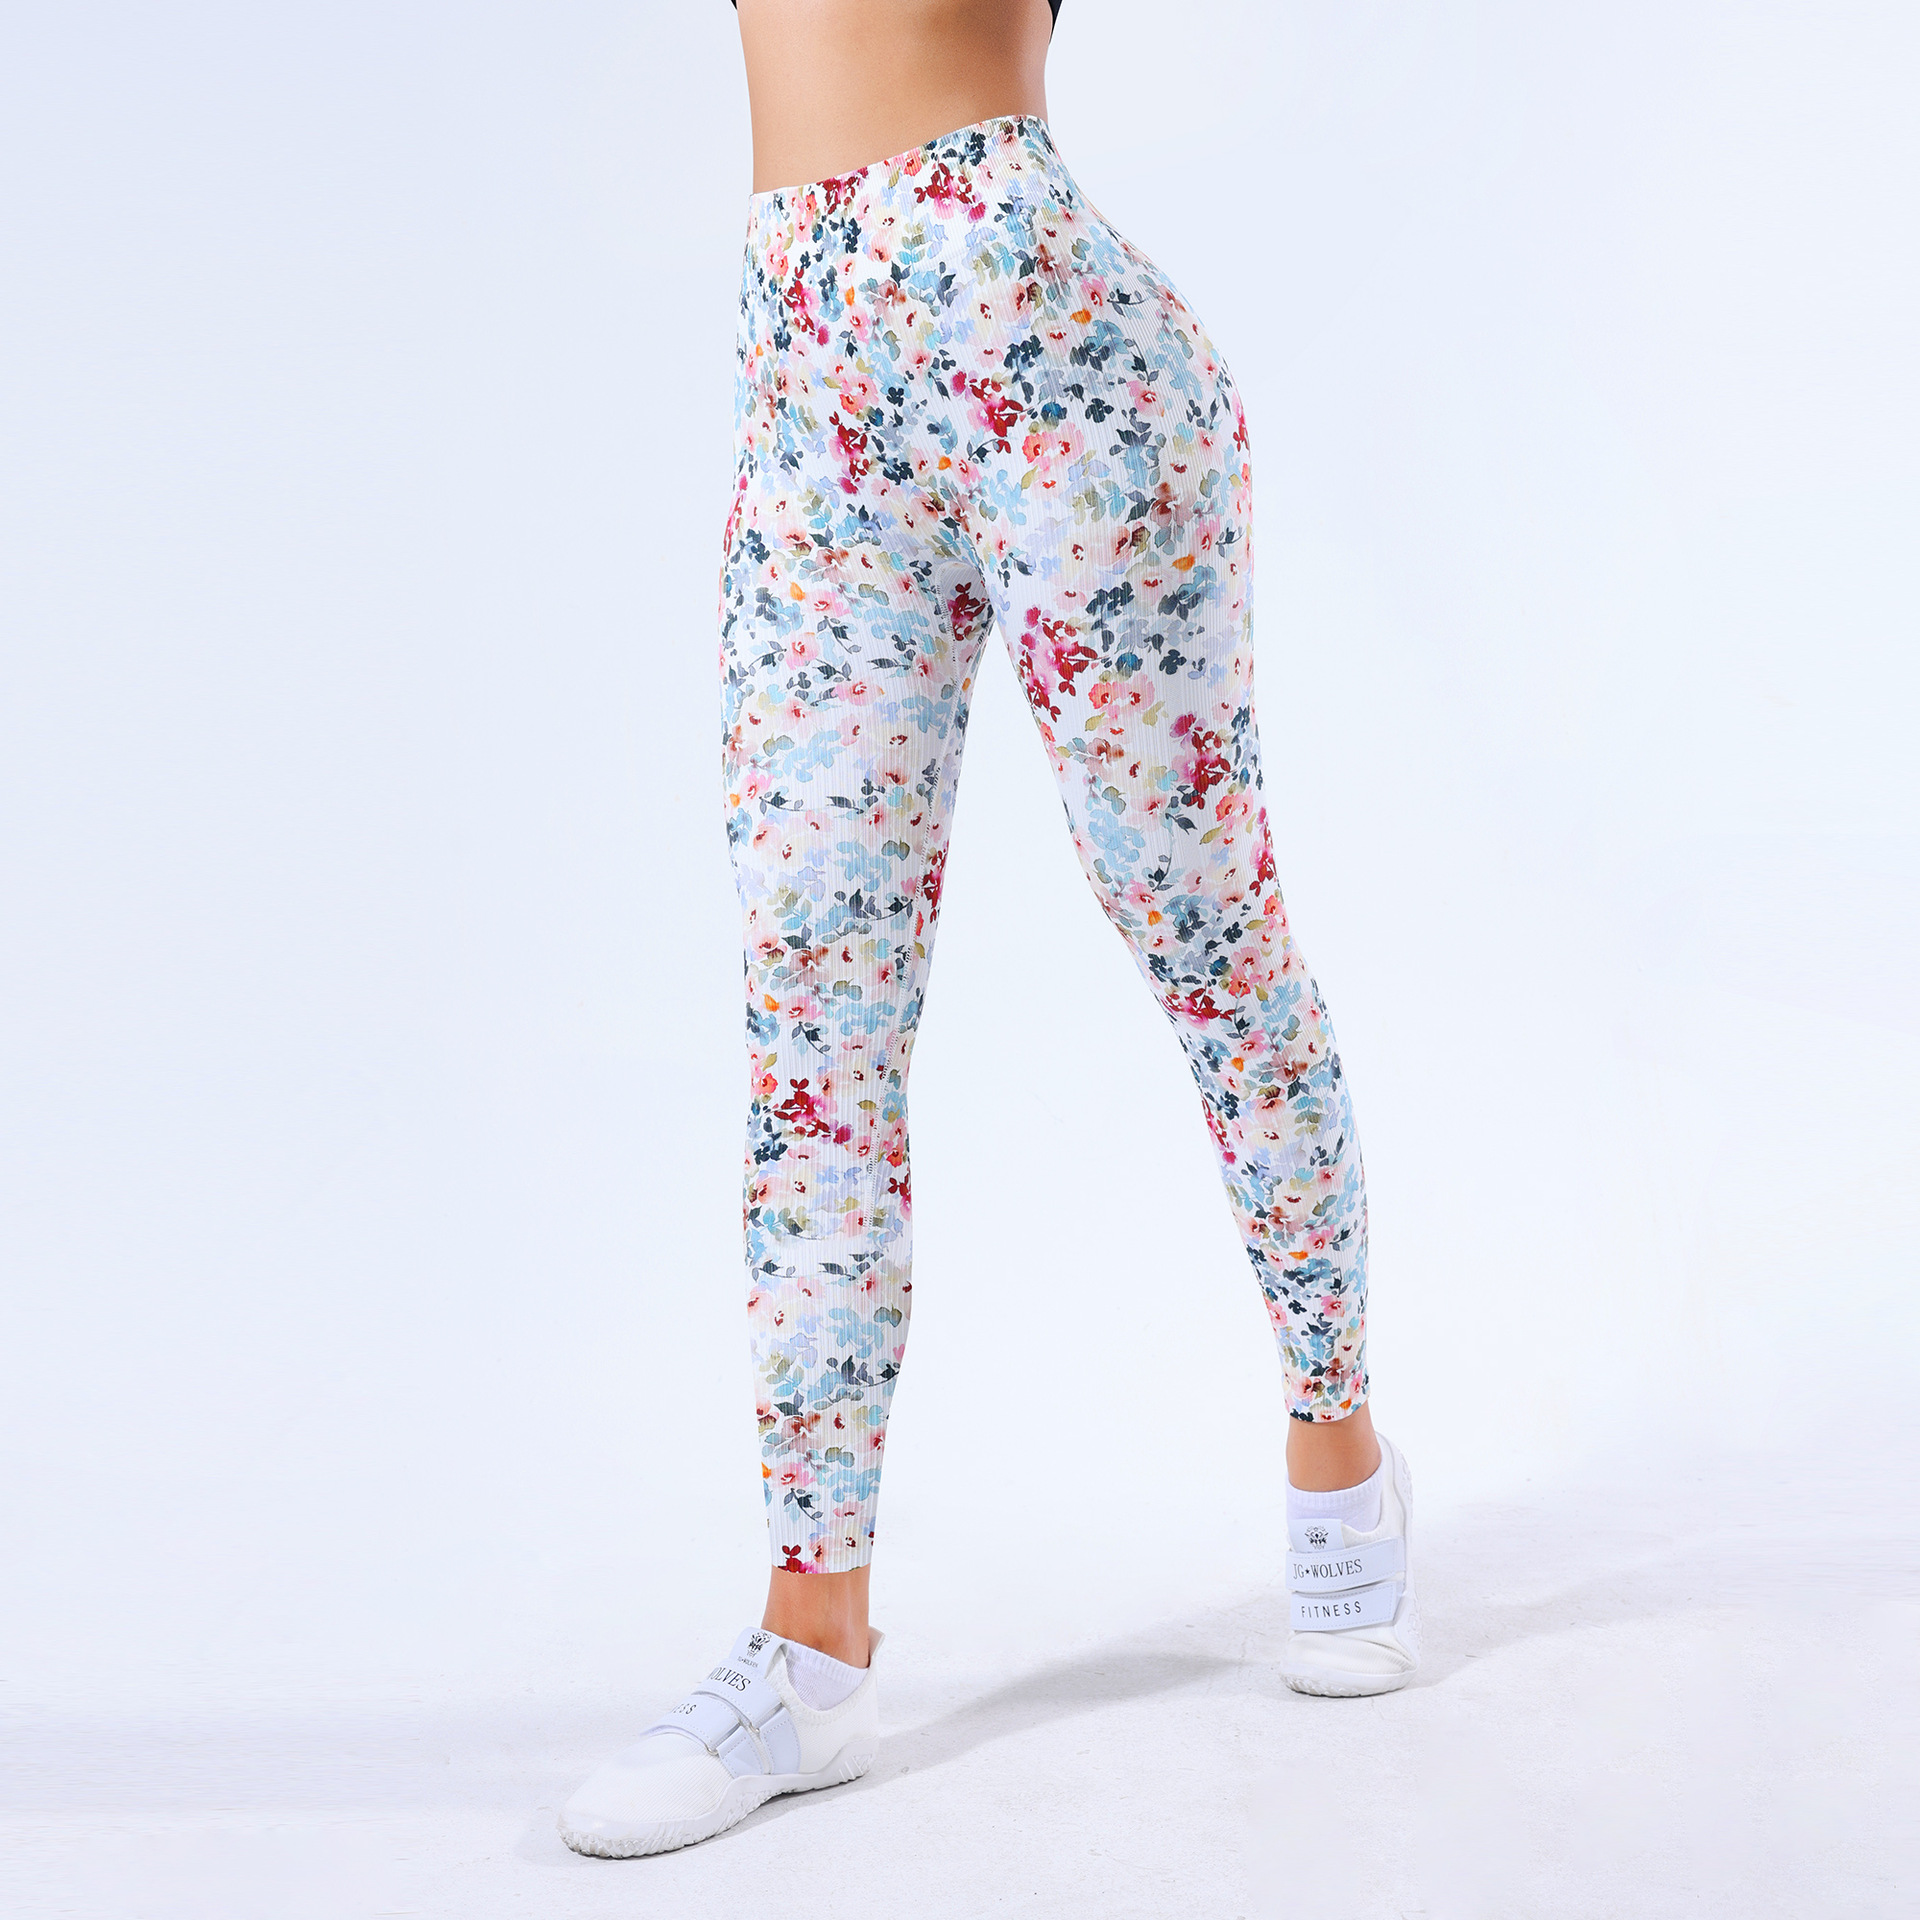 Processing Customization European and American 3D Printing Peach Hip Yoga Trousers Women's Quick-Dry Hip Raise High Top Sports Fitness Yoga Pants